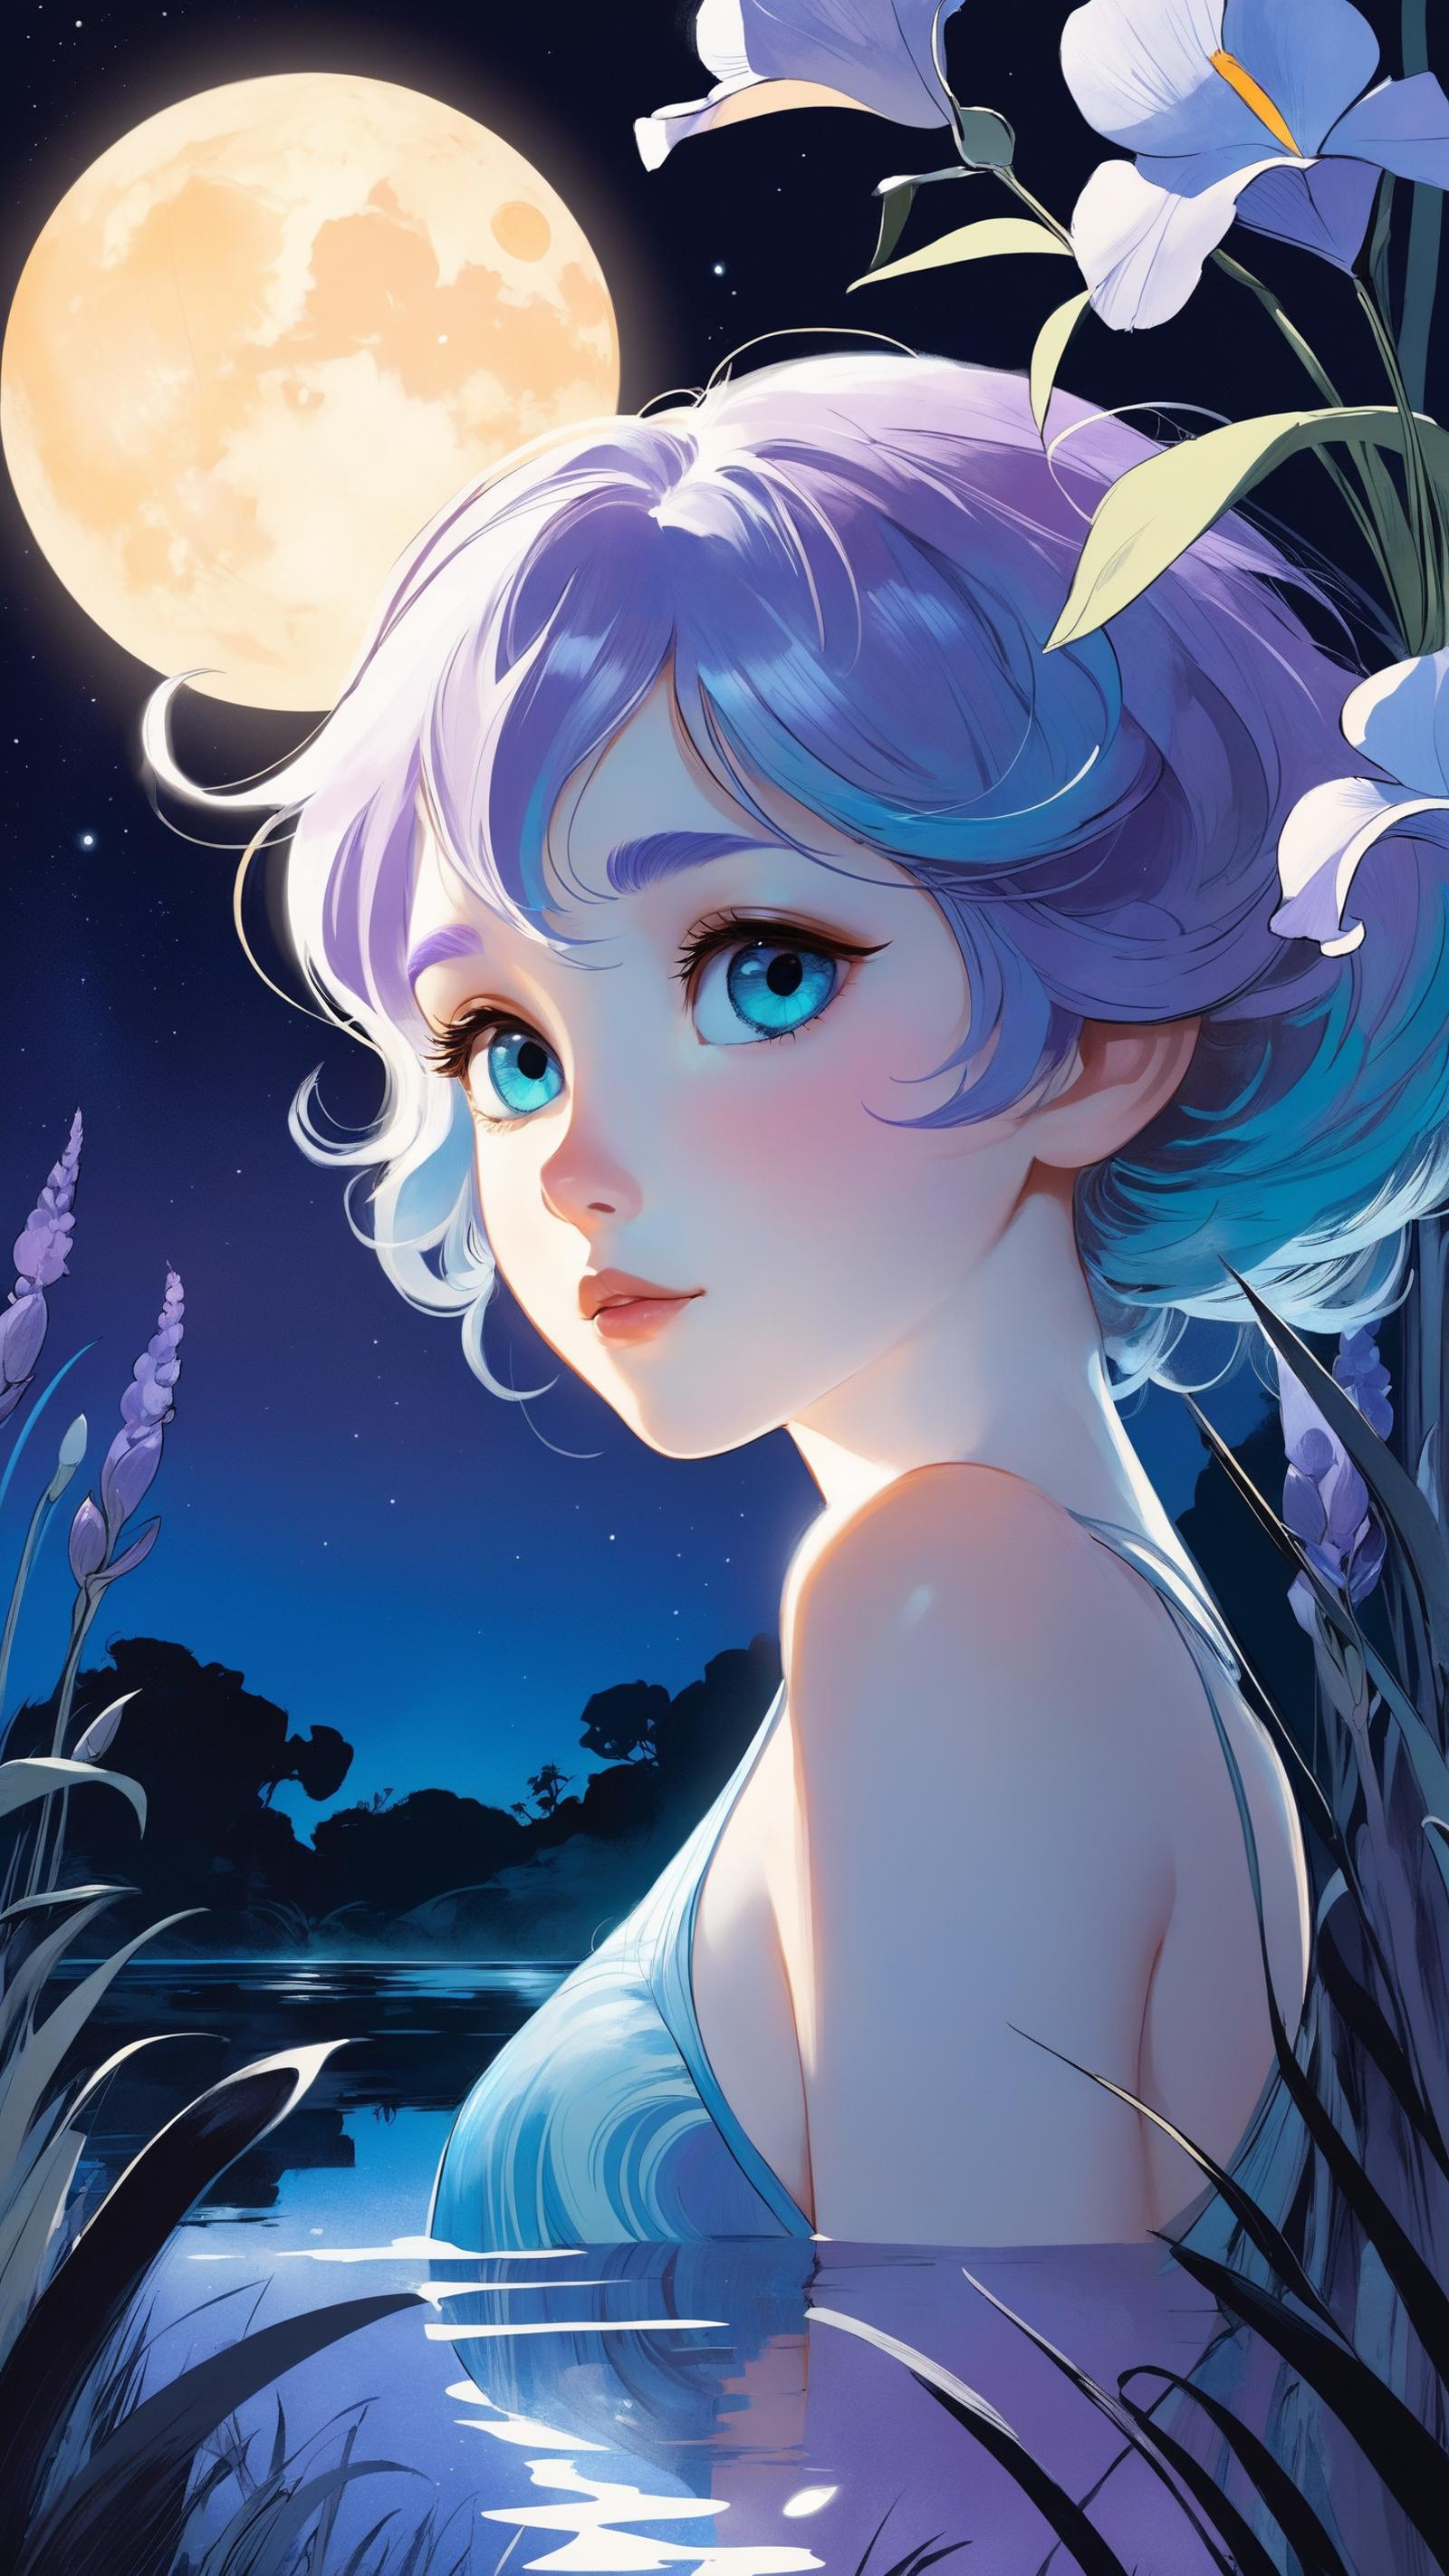 Anime illustration of a purple-haired girl with blue eyes, wearing a white dress, and standing in front of a moonlit night sky with purple flowers in the background.